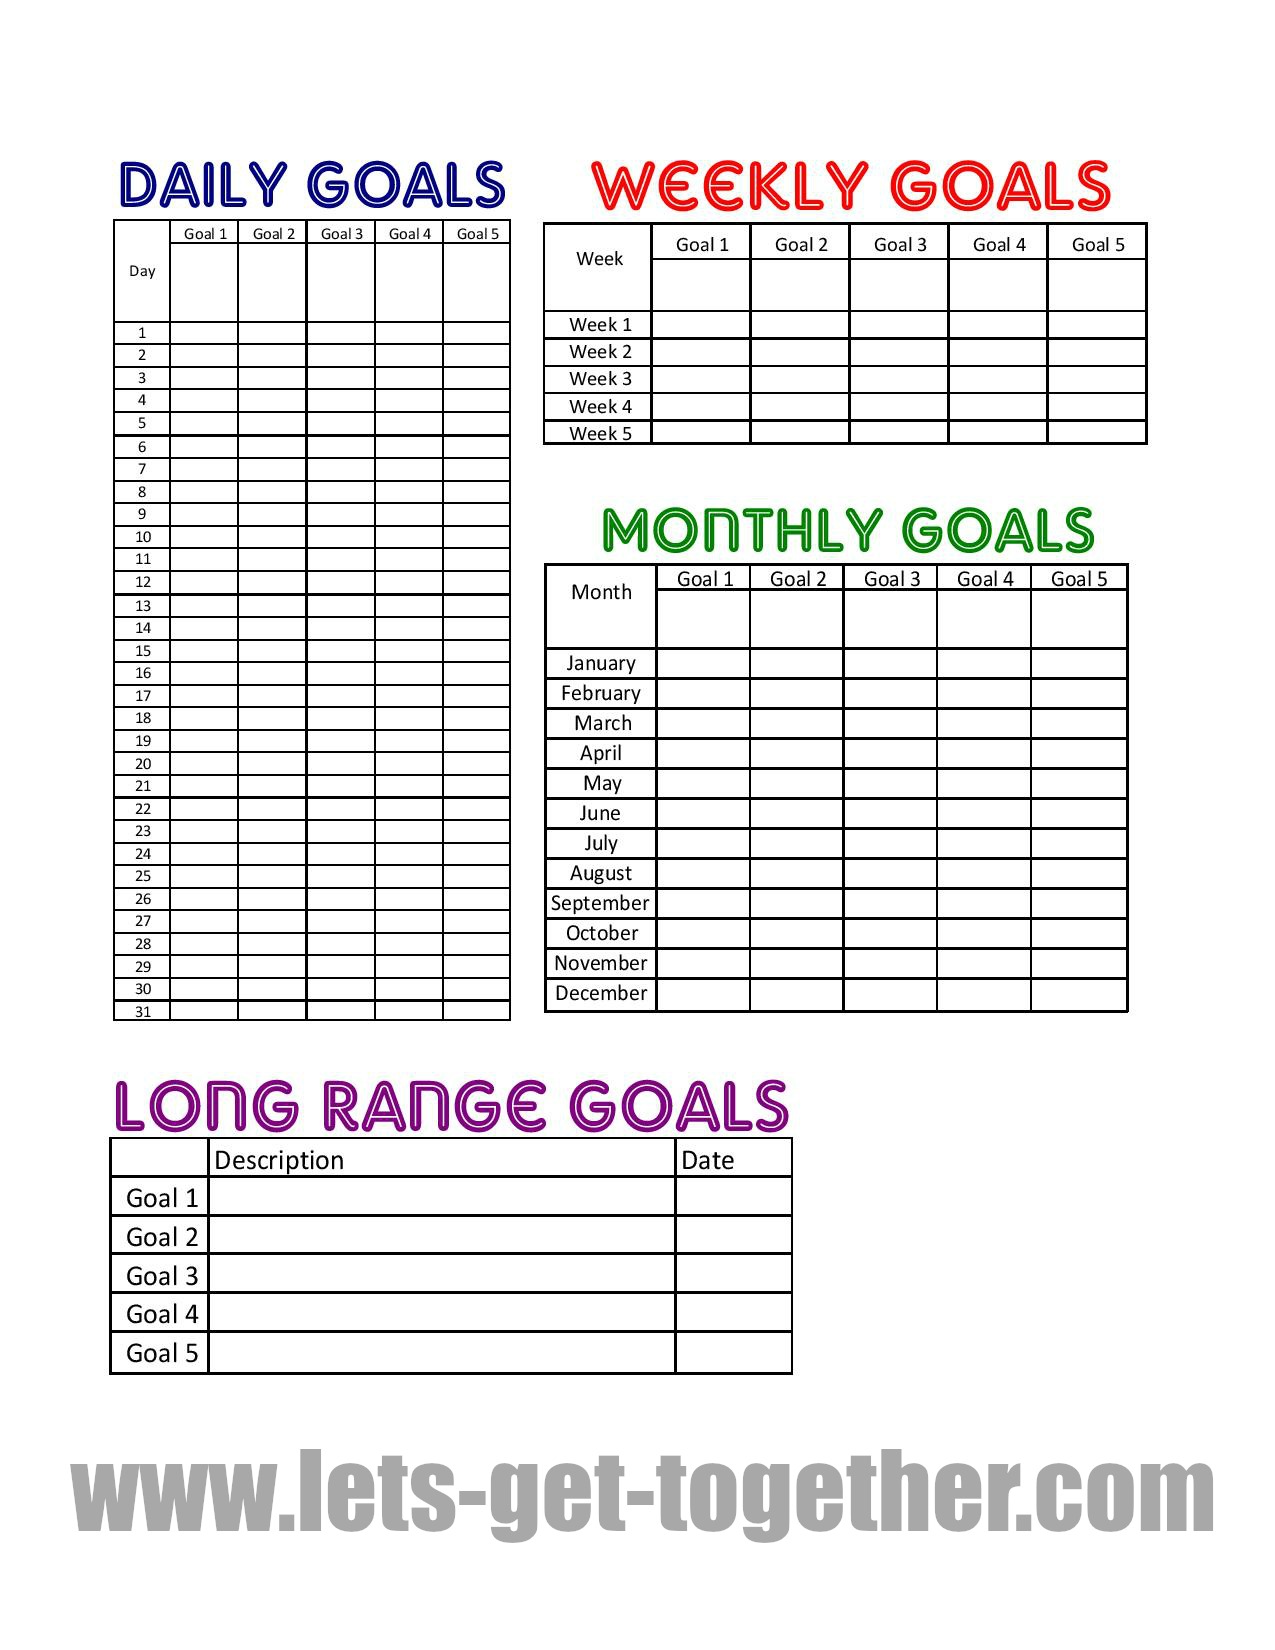 weight-loss-goal-tracker-chart-track-your-way-to-losing-2-stone-one